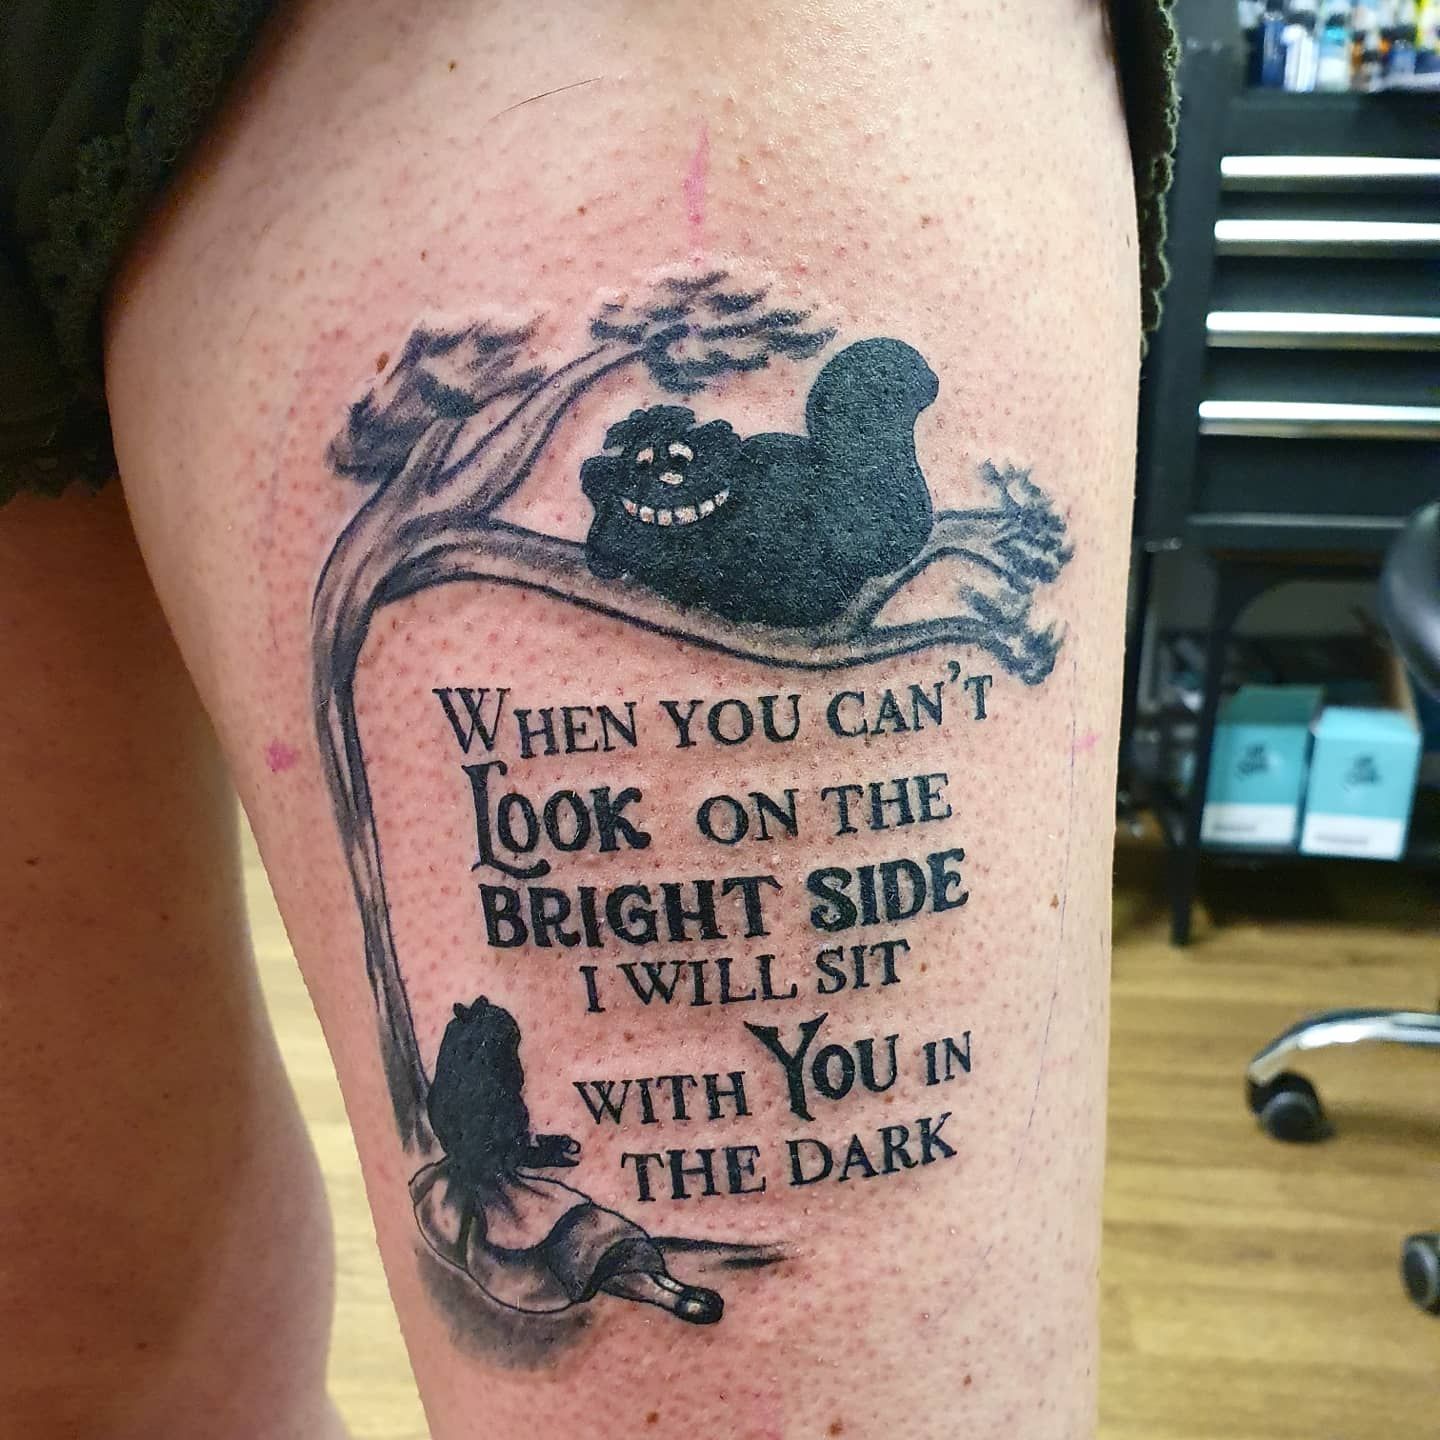 Its going to be difficult to look on the bright side of laser tattoo  removal  rbadtattoos